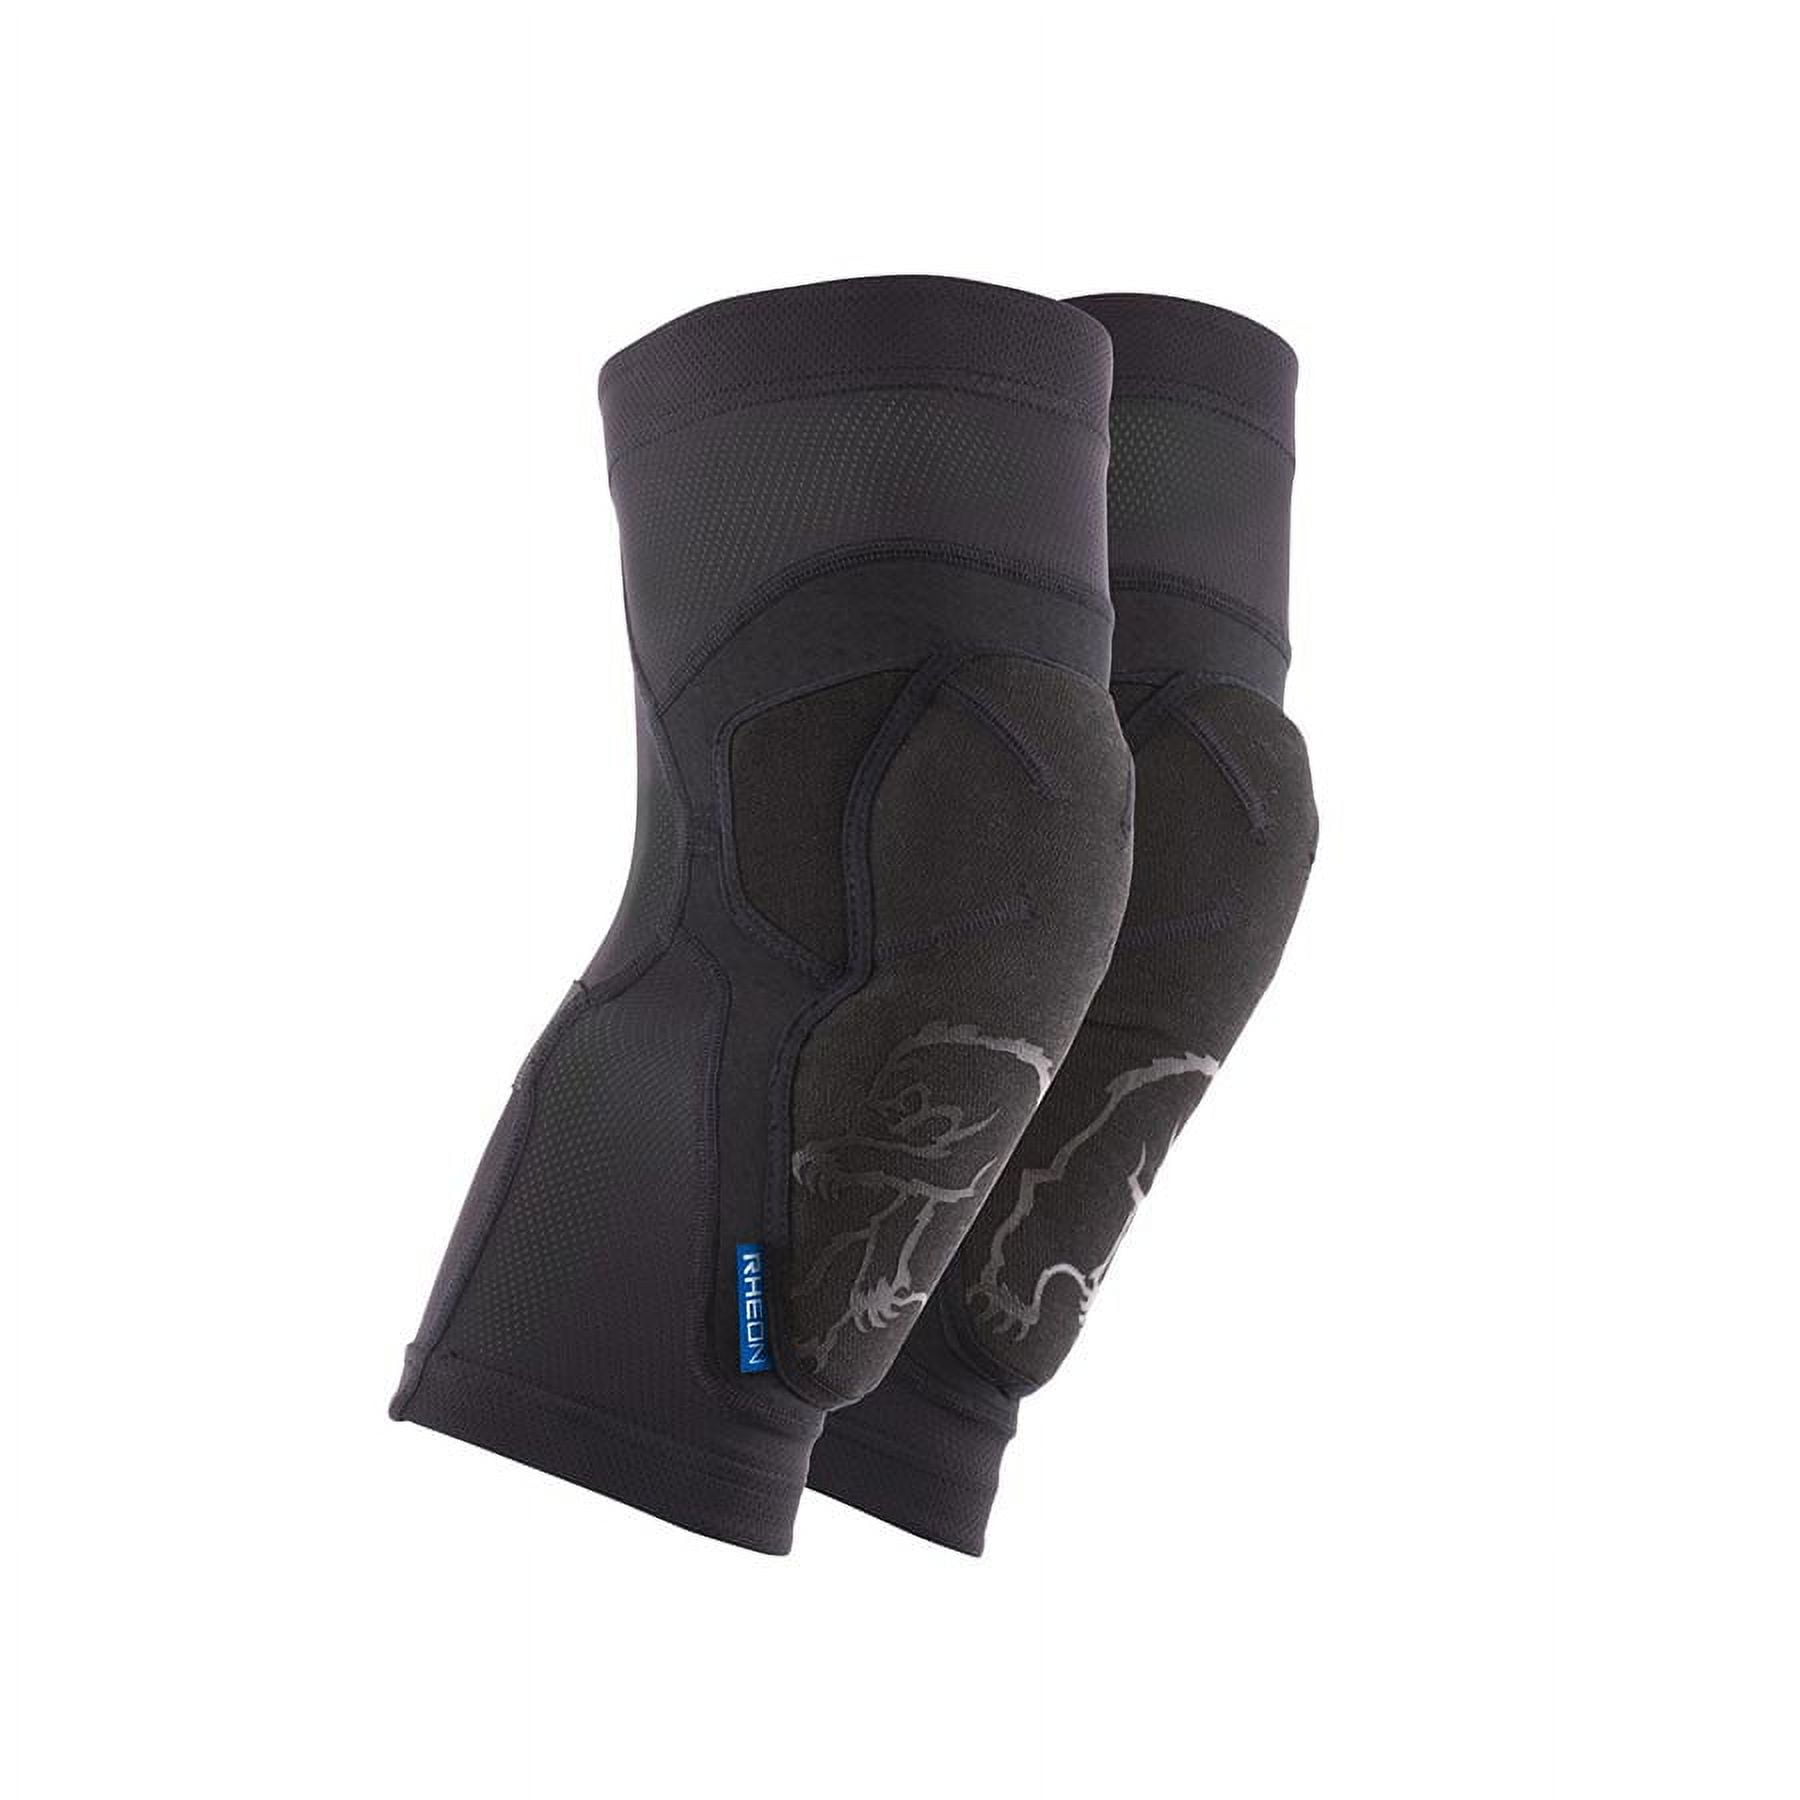 Working Concepts Soft Knees No Strap Knee Pads 1010 for sale